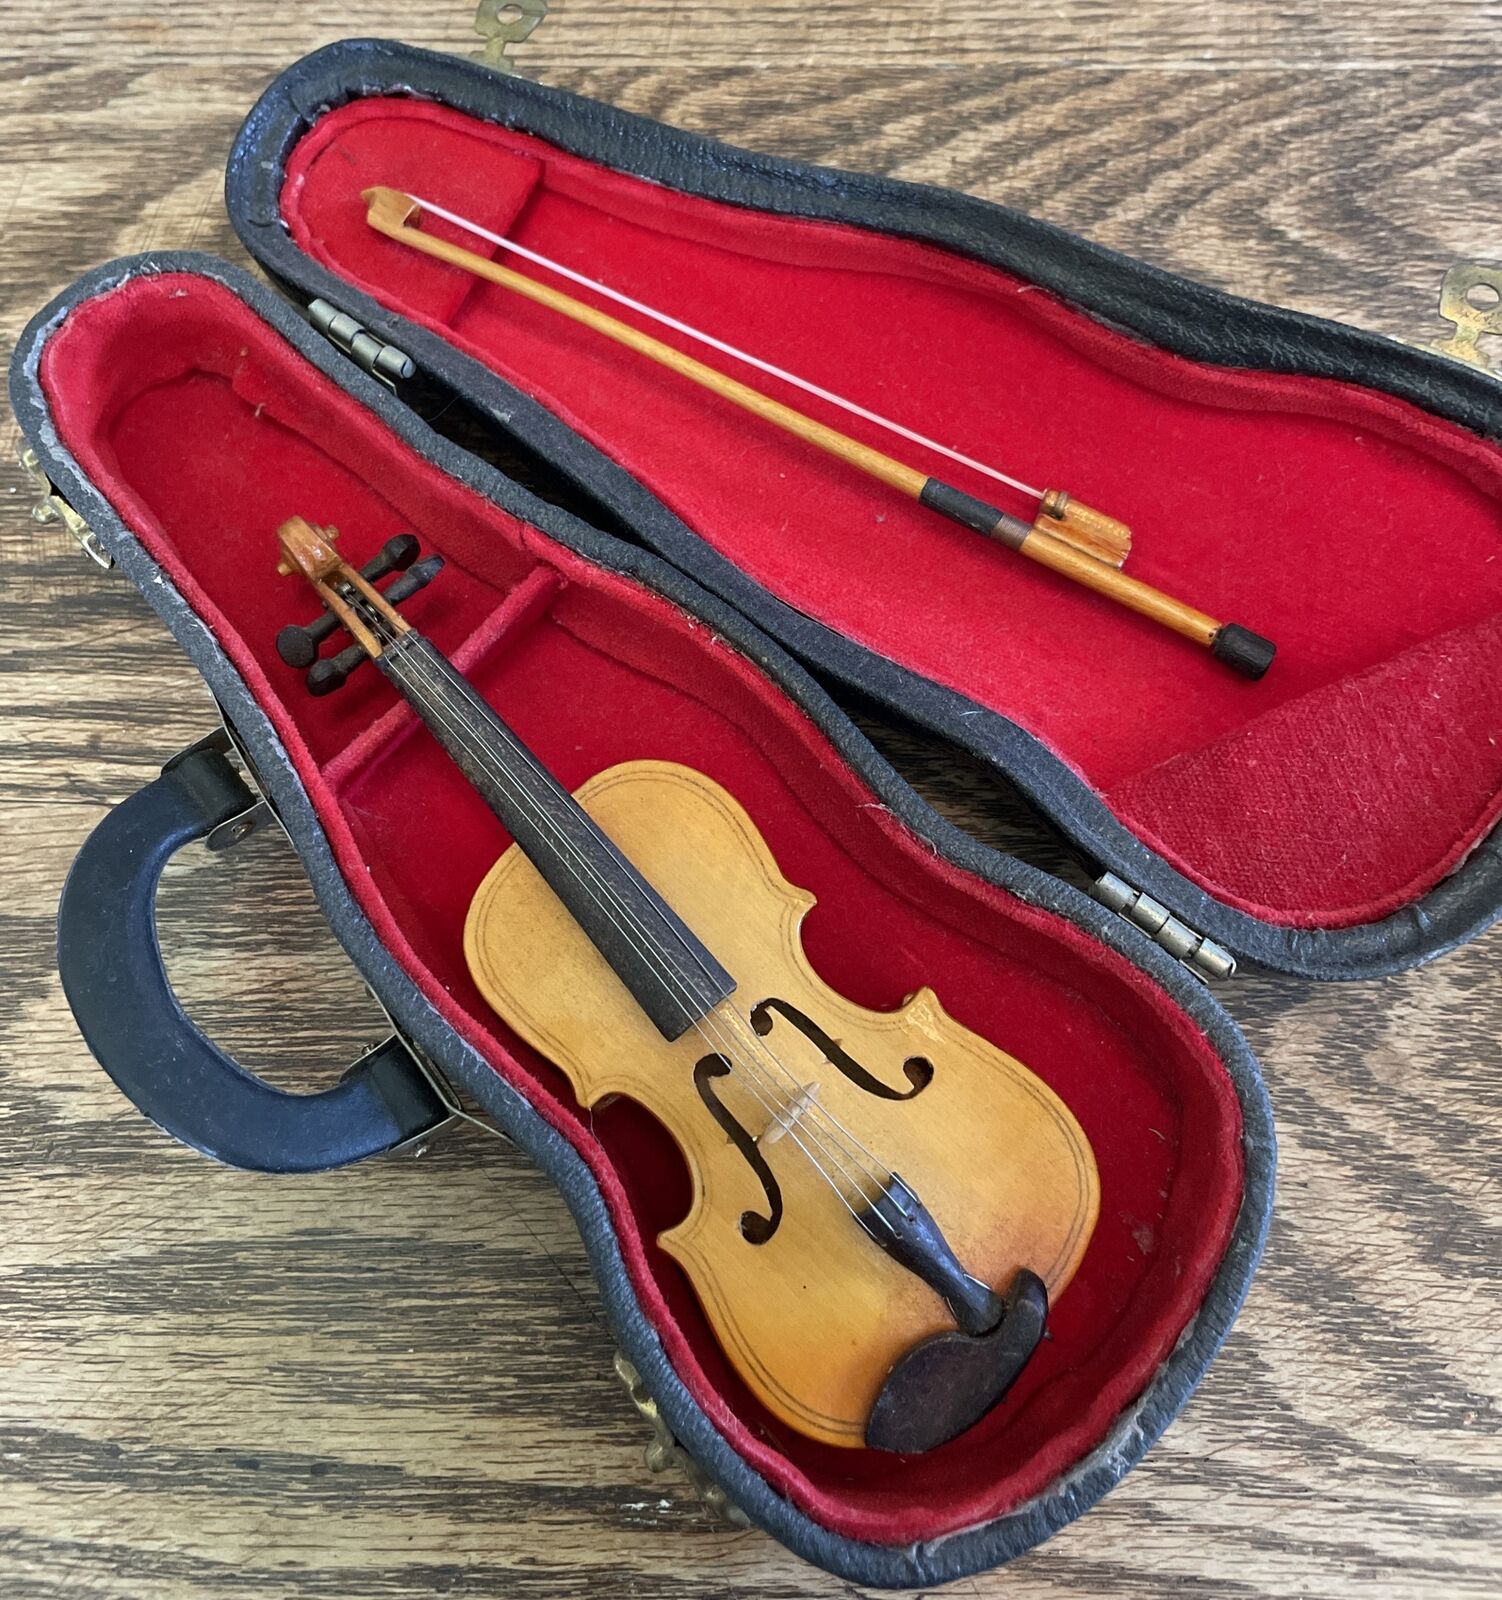 Adorable Hand Made Miniature Violin With Bow with Case Collectible Model Violin